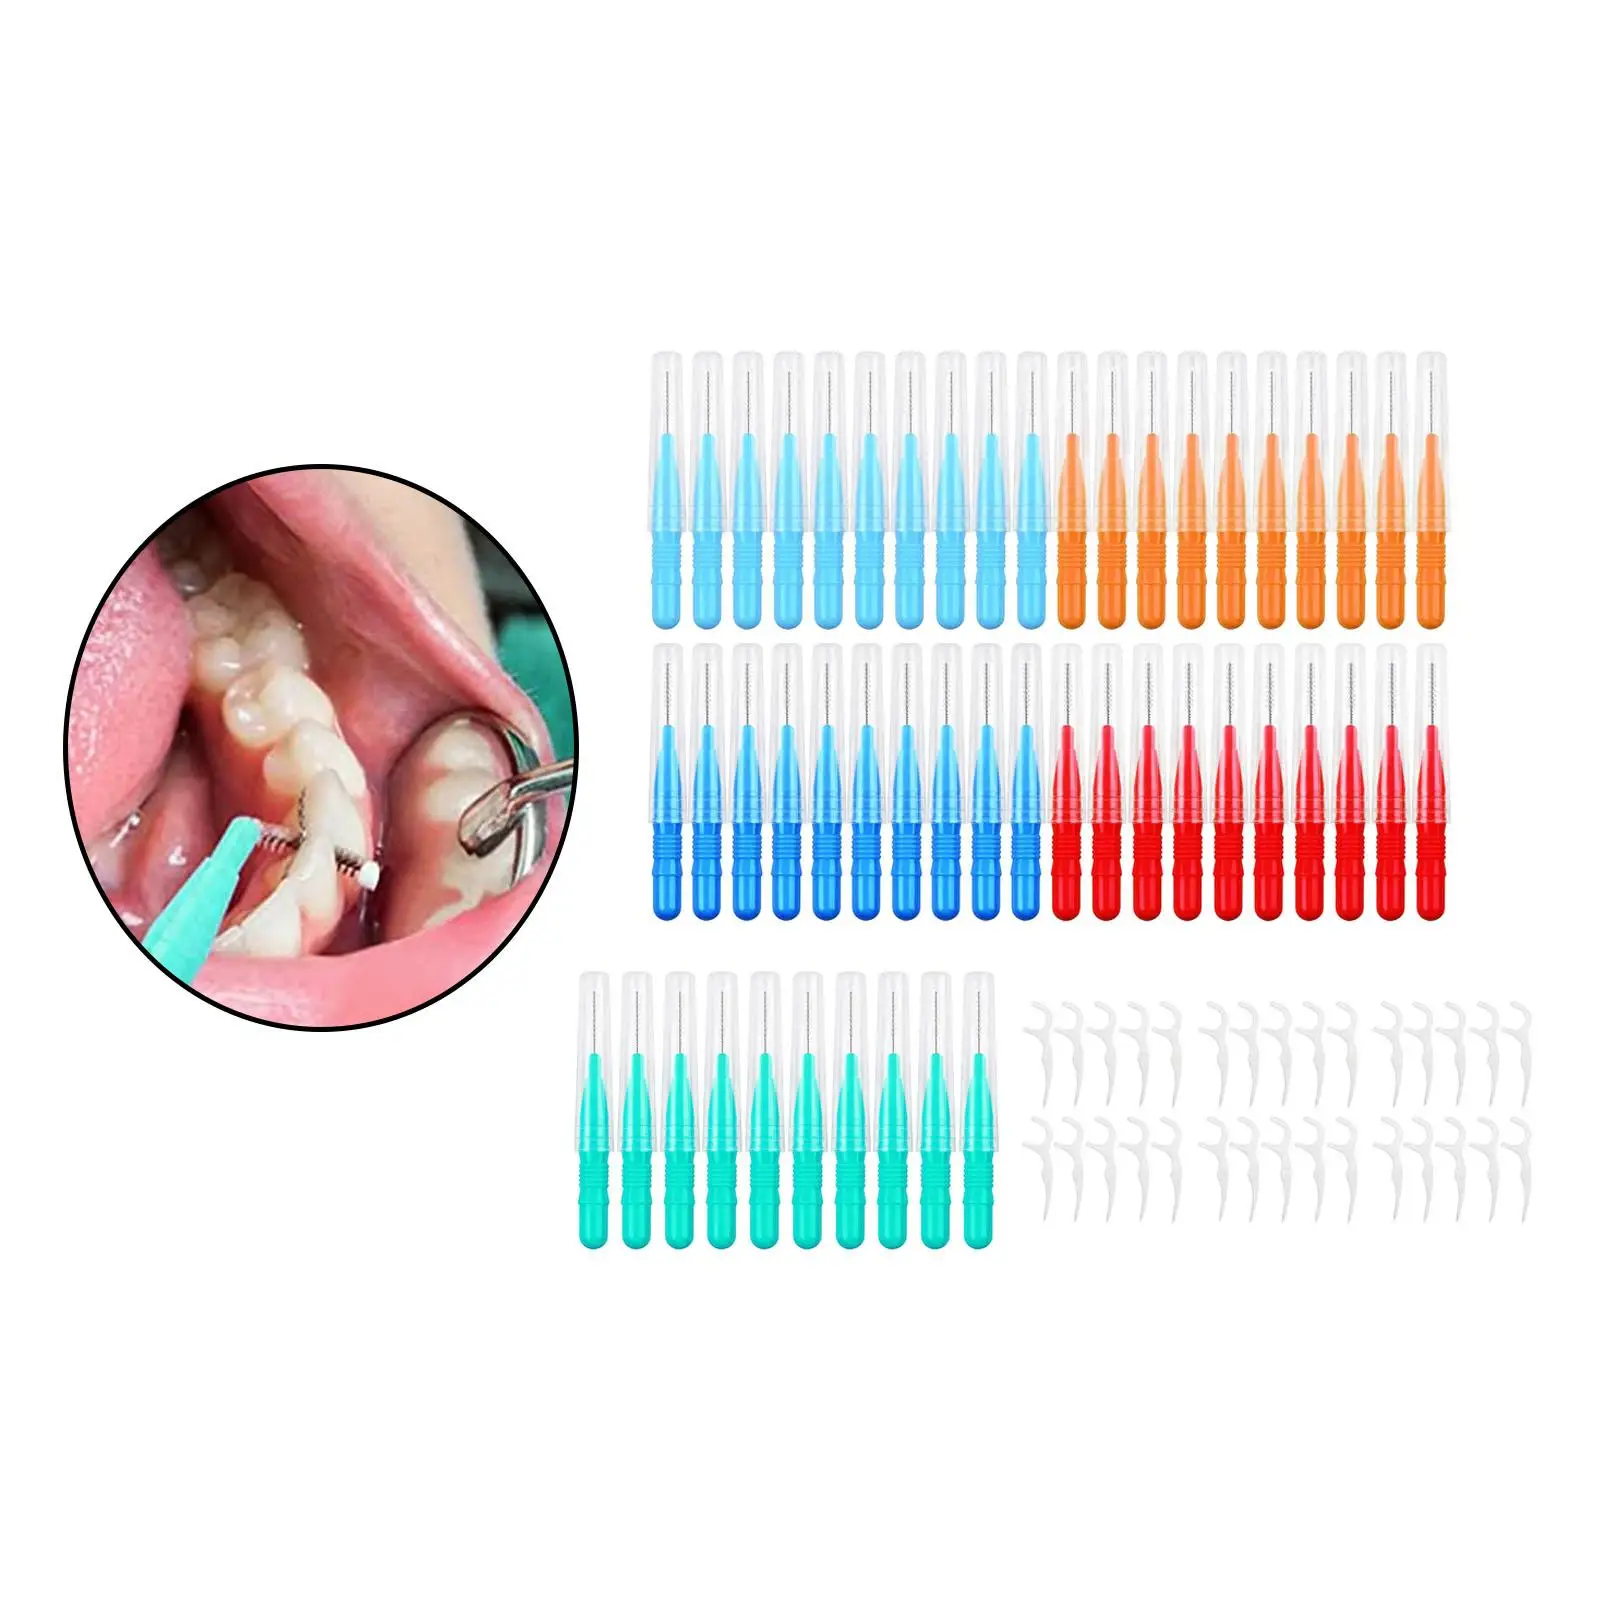 50x Interdental Brushes for Removing Food and Plaque Between Teeth 2/2.5/3mm Portable 30Pcs Floss Sticks Teeth Cleaners